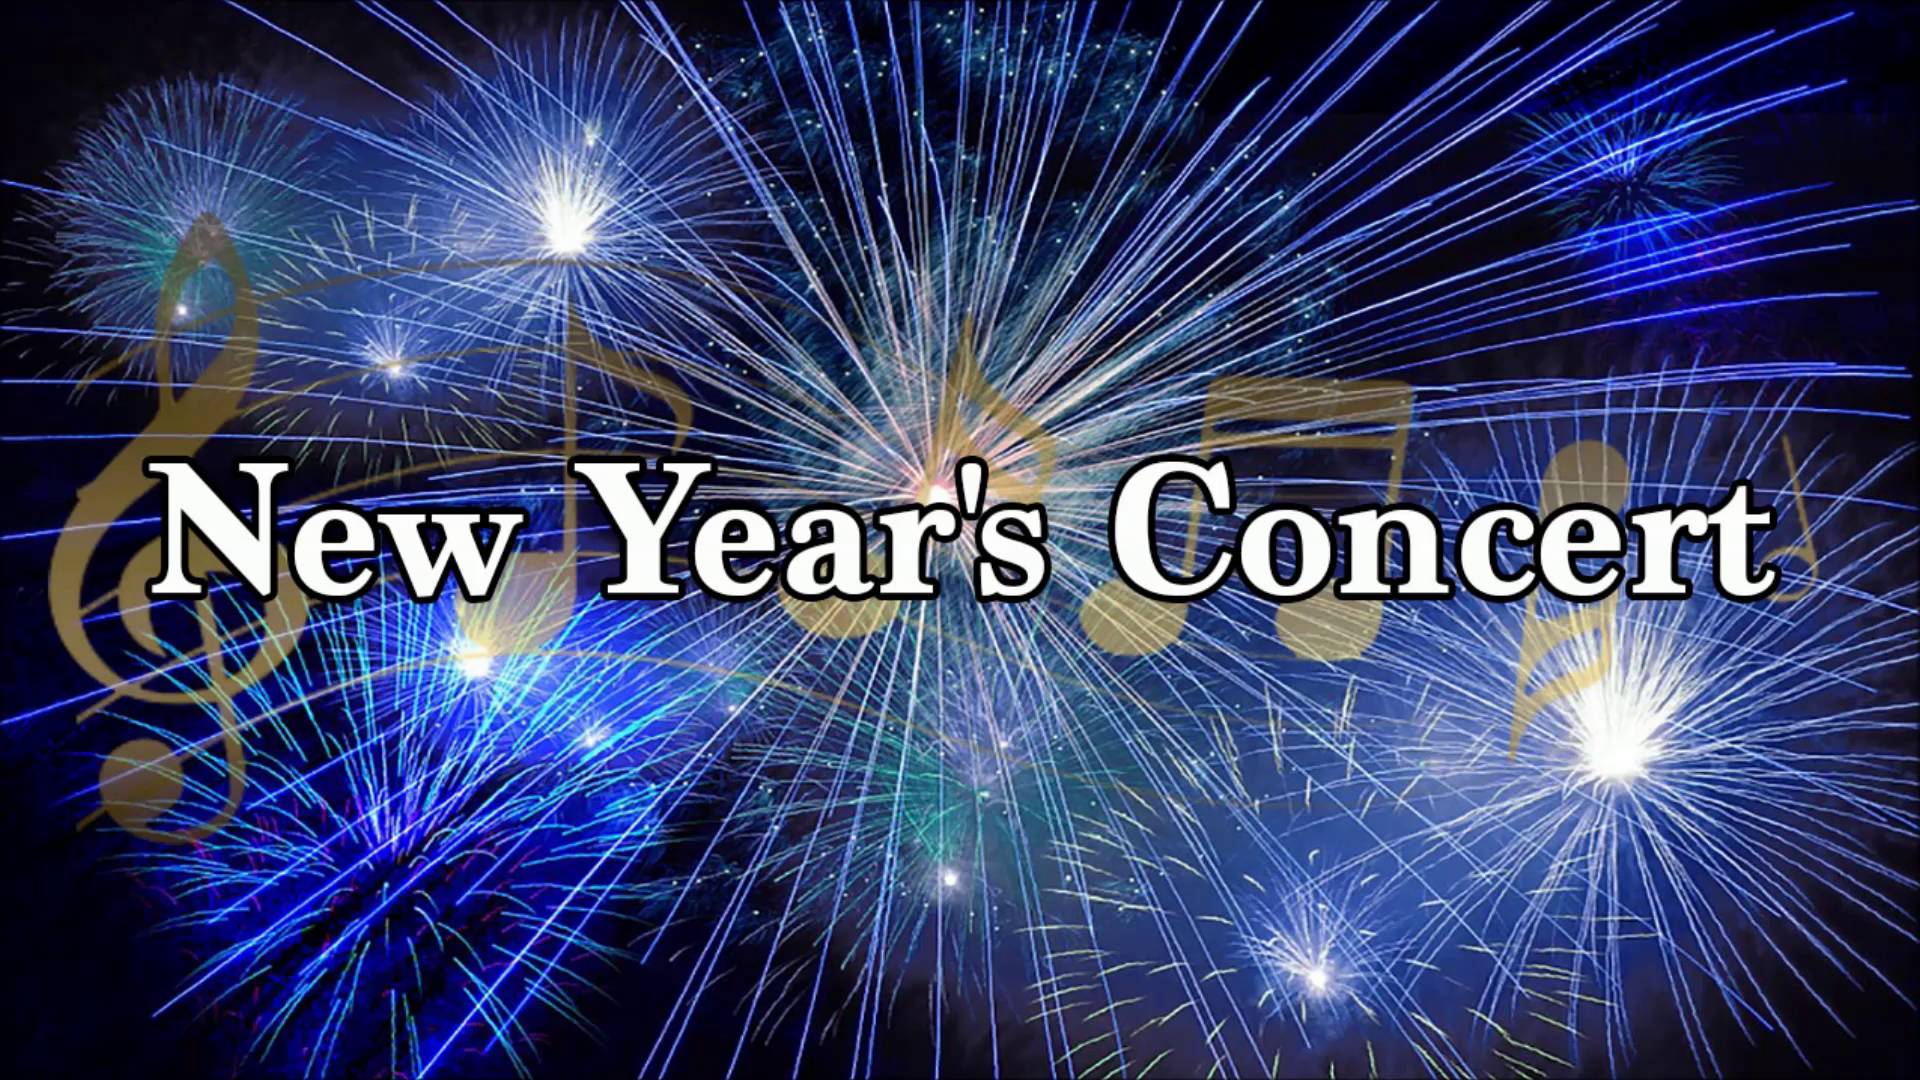 New Year's Concert | Happy New Year 2017 | Classical Music - YouTube